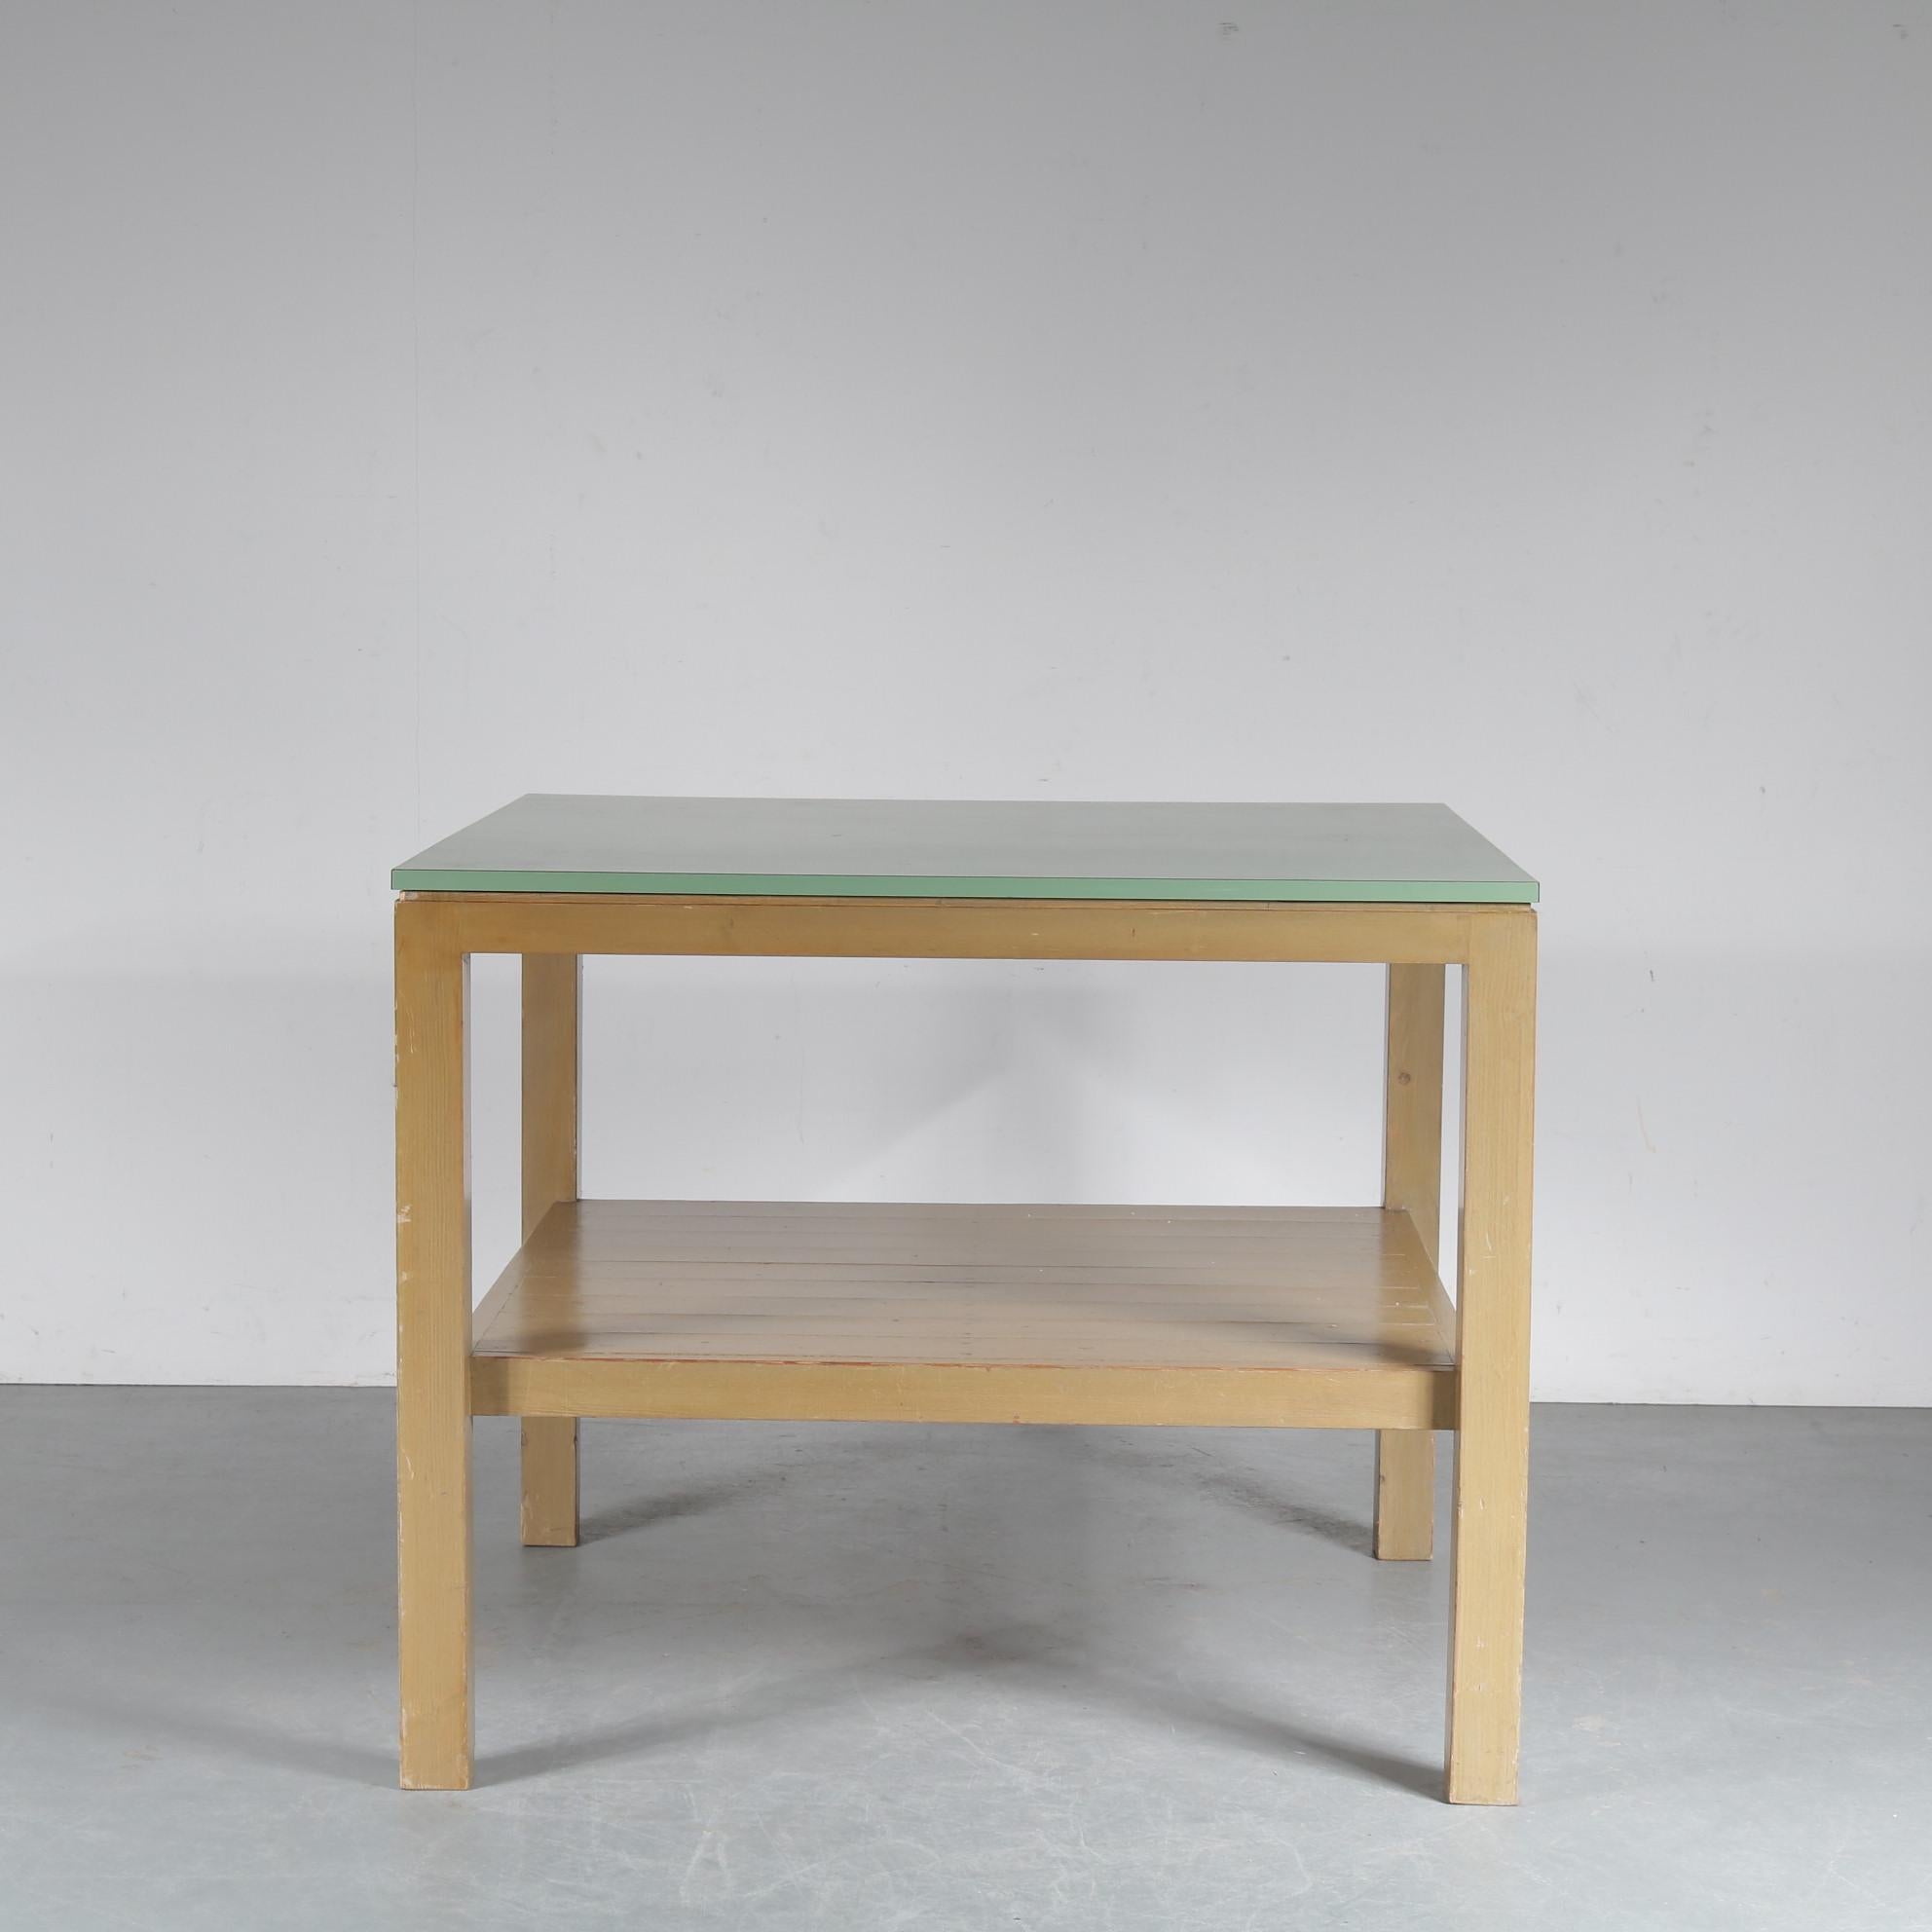 A rare working table designed by Dom Hans van der Laan in the Netherlands in the 1970s.

It’s eye-catching, minimalist design is highly recognizable and the Bossche School style that is was designed in, is part of mid-century Dutch design history.